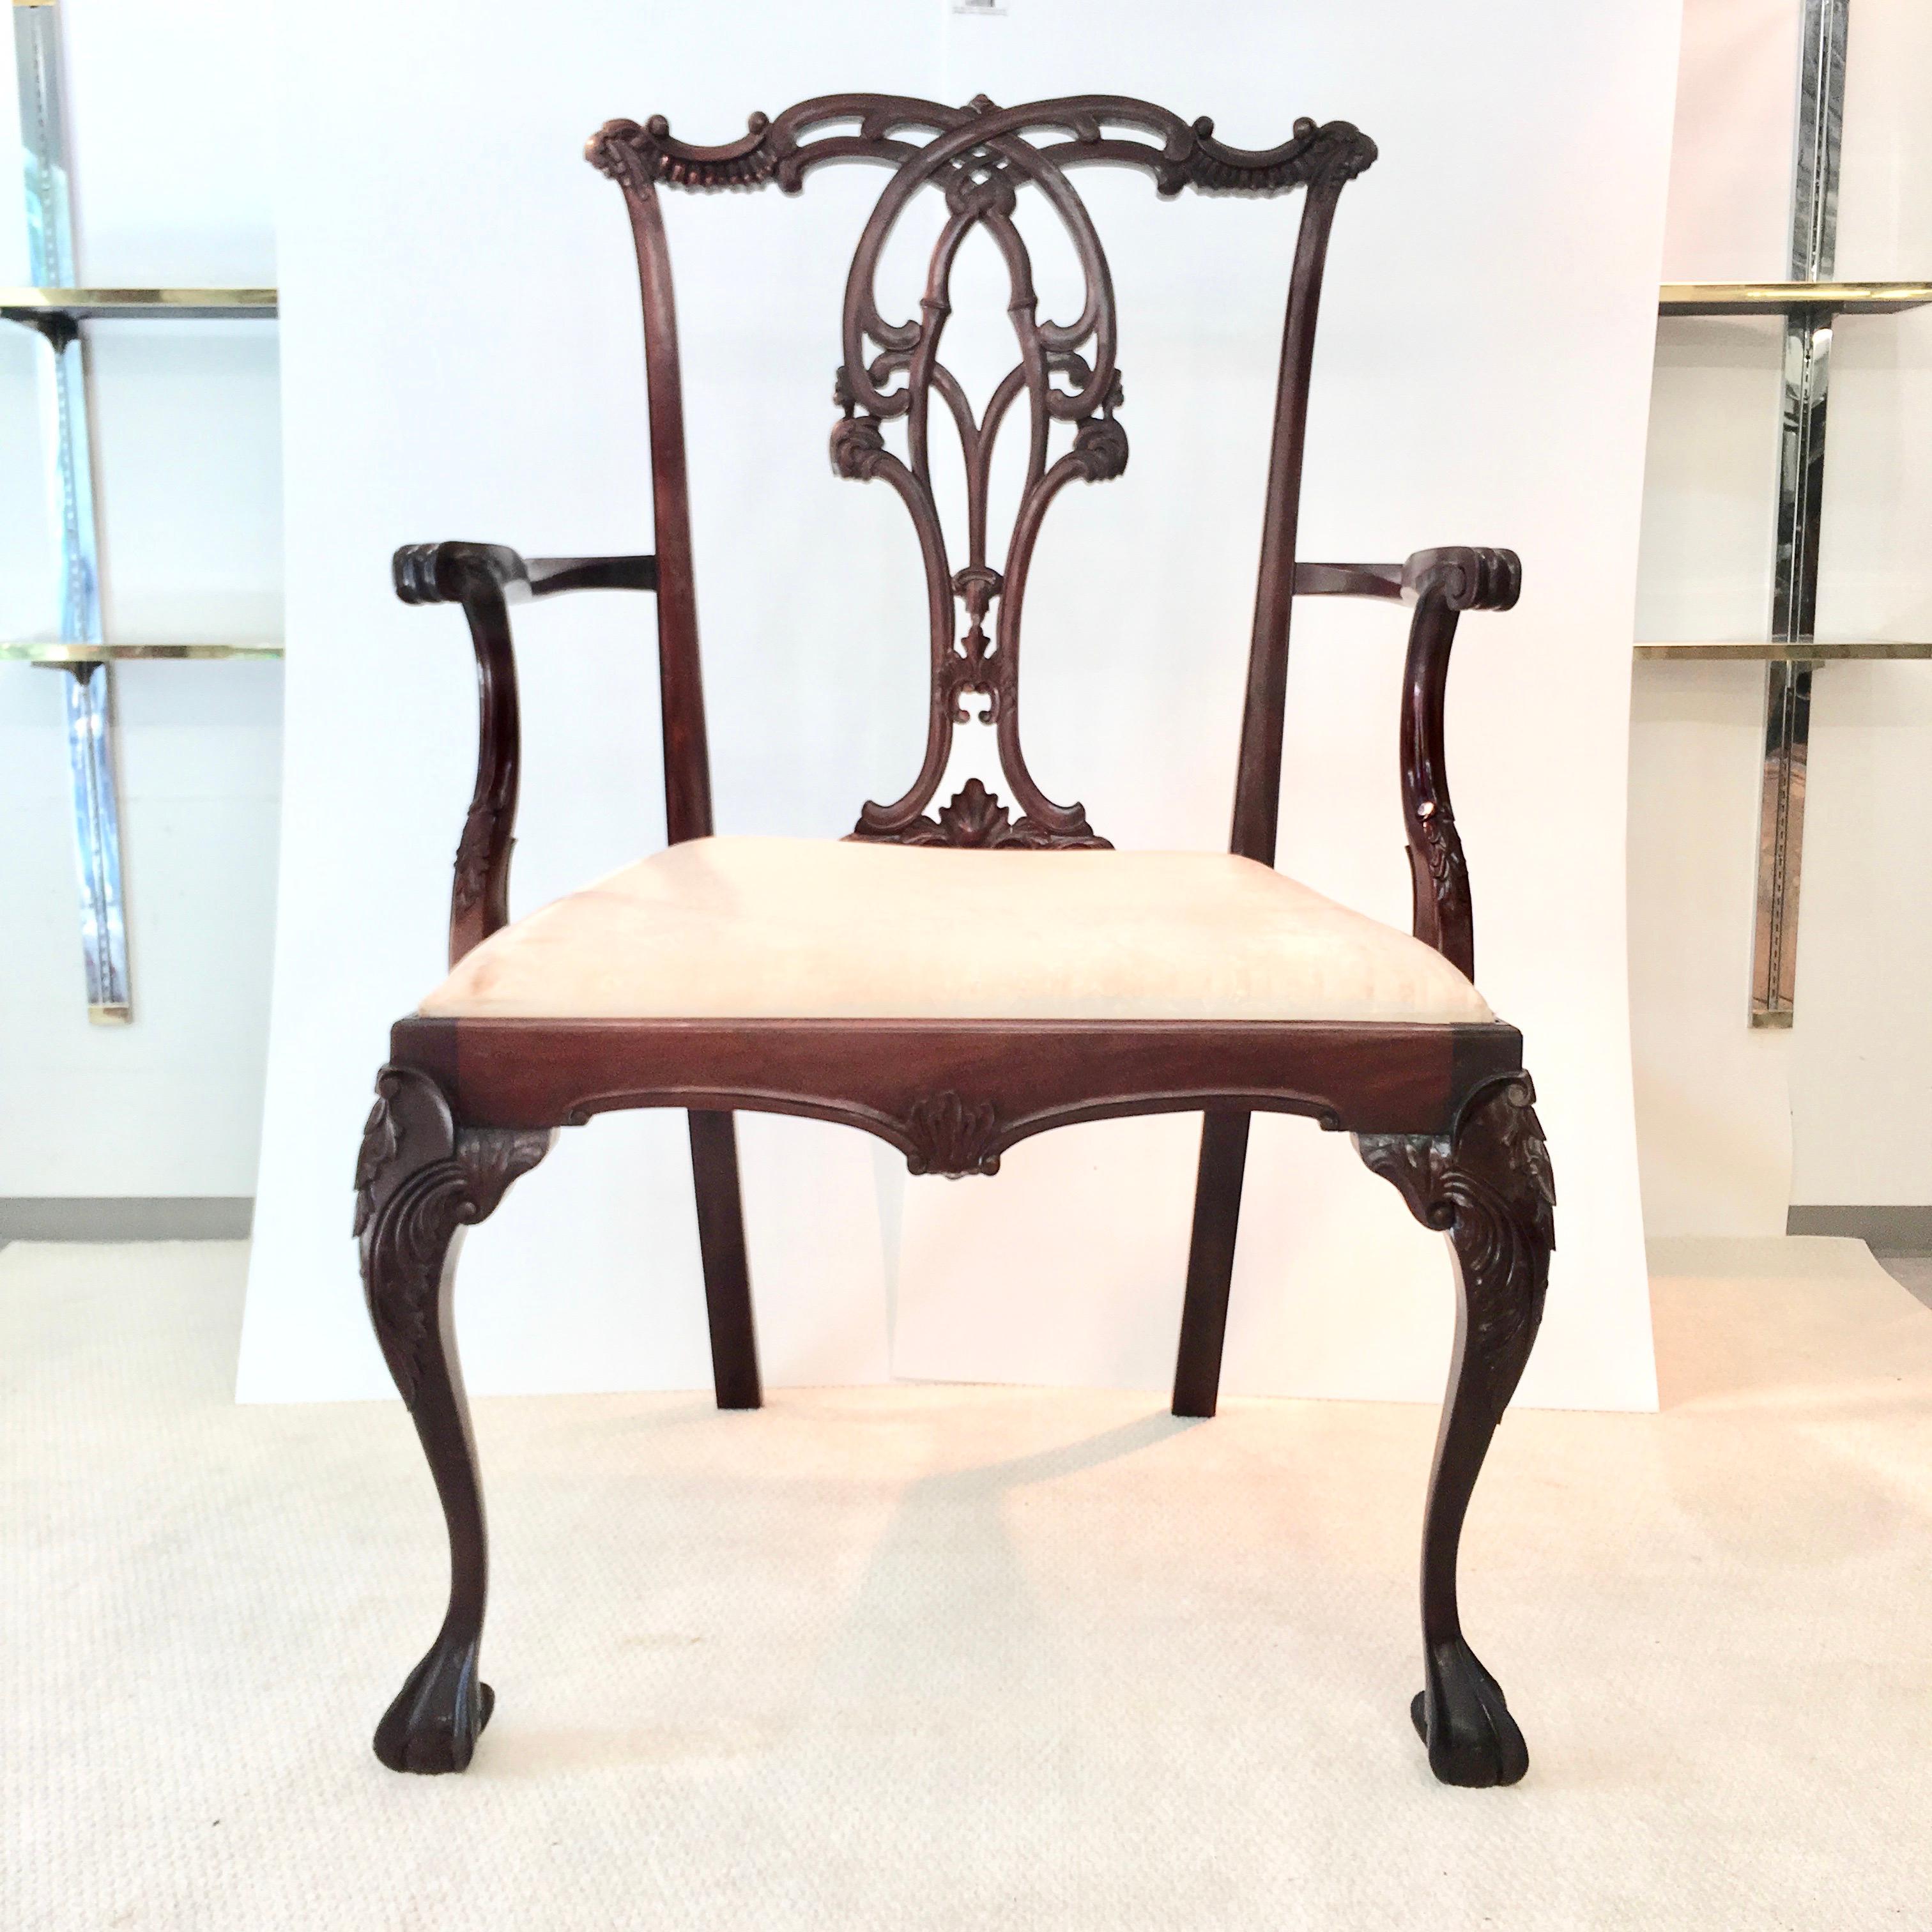 High quality carved solid mahogany giant Chippendale style armchair with upholstered seat. Very sturdy. Great for an event prop, advertising or promotional display.

Measures: Seat height 37